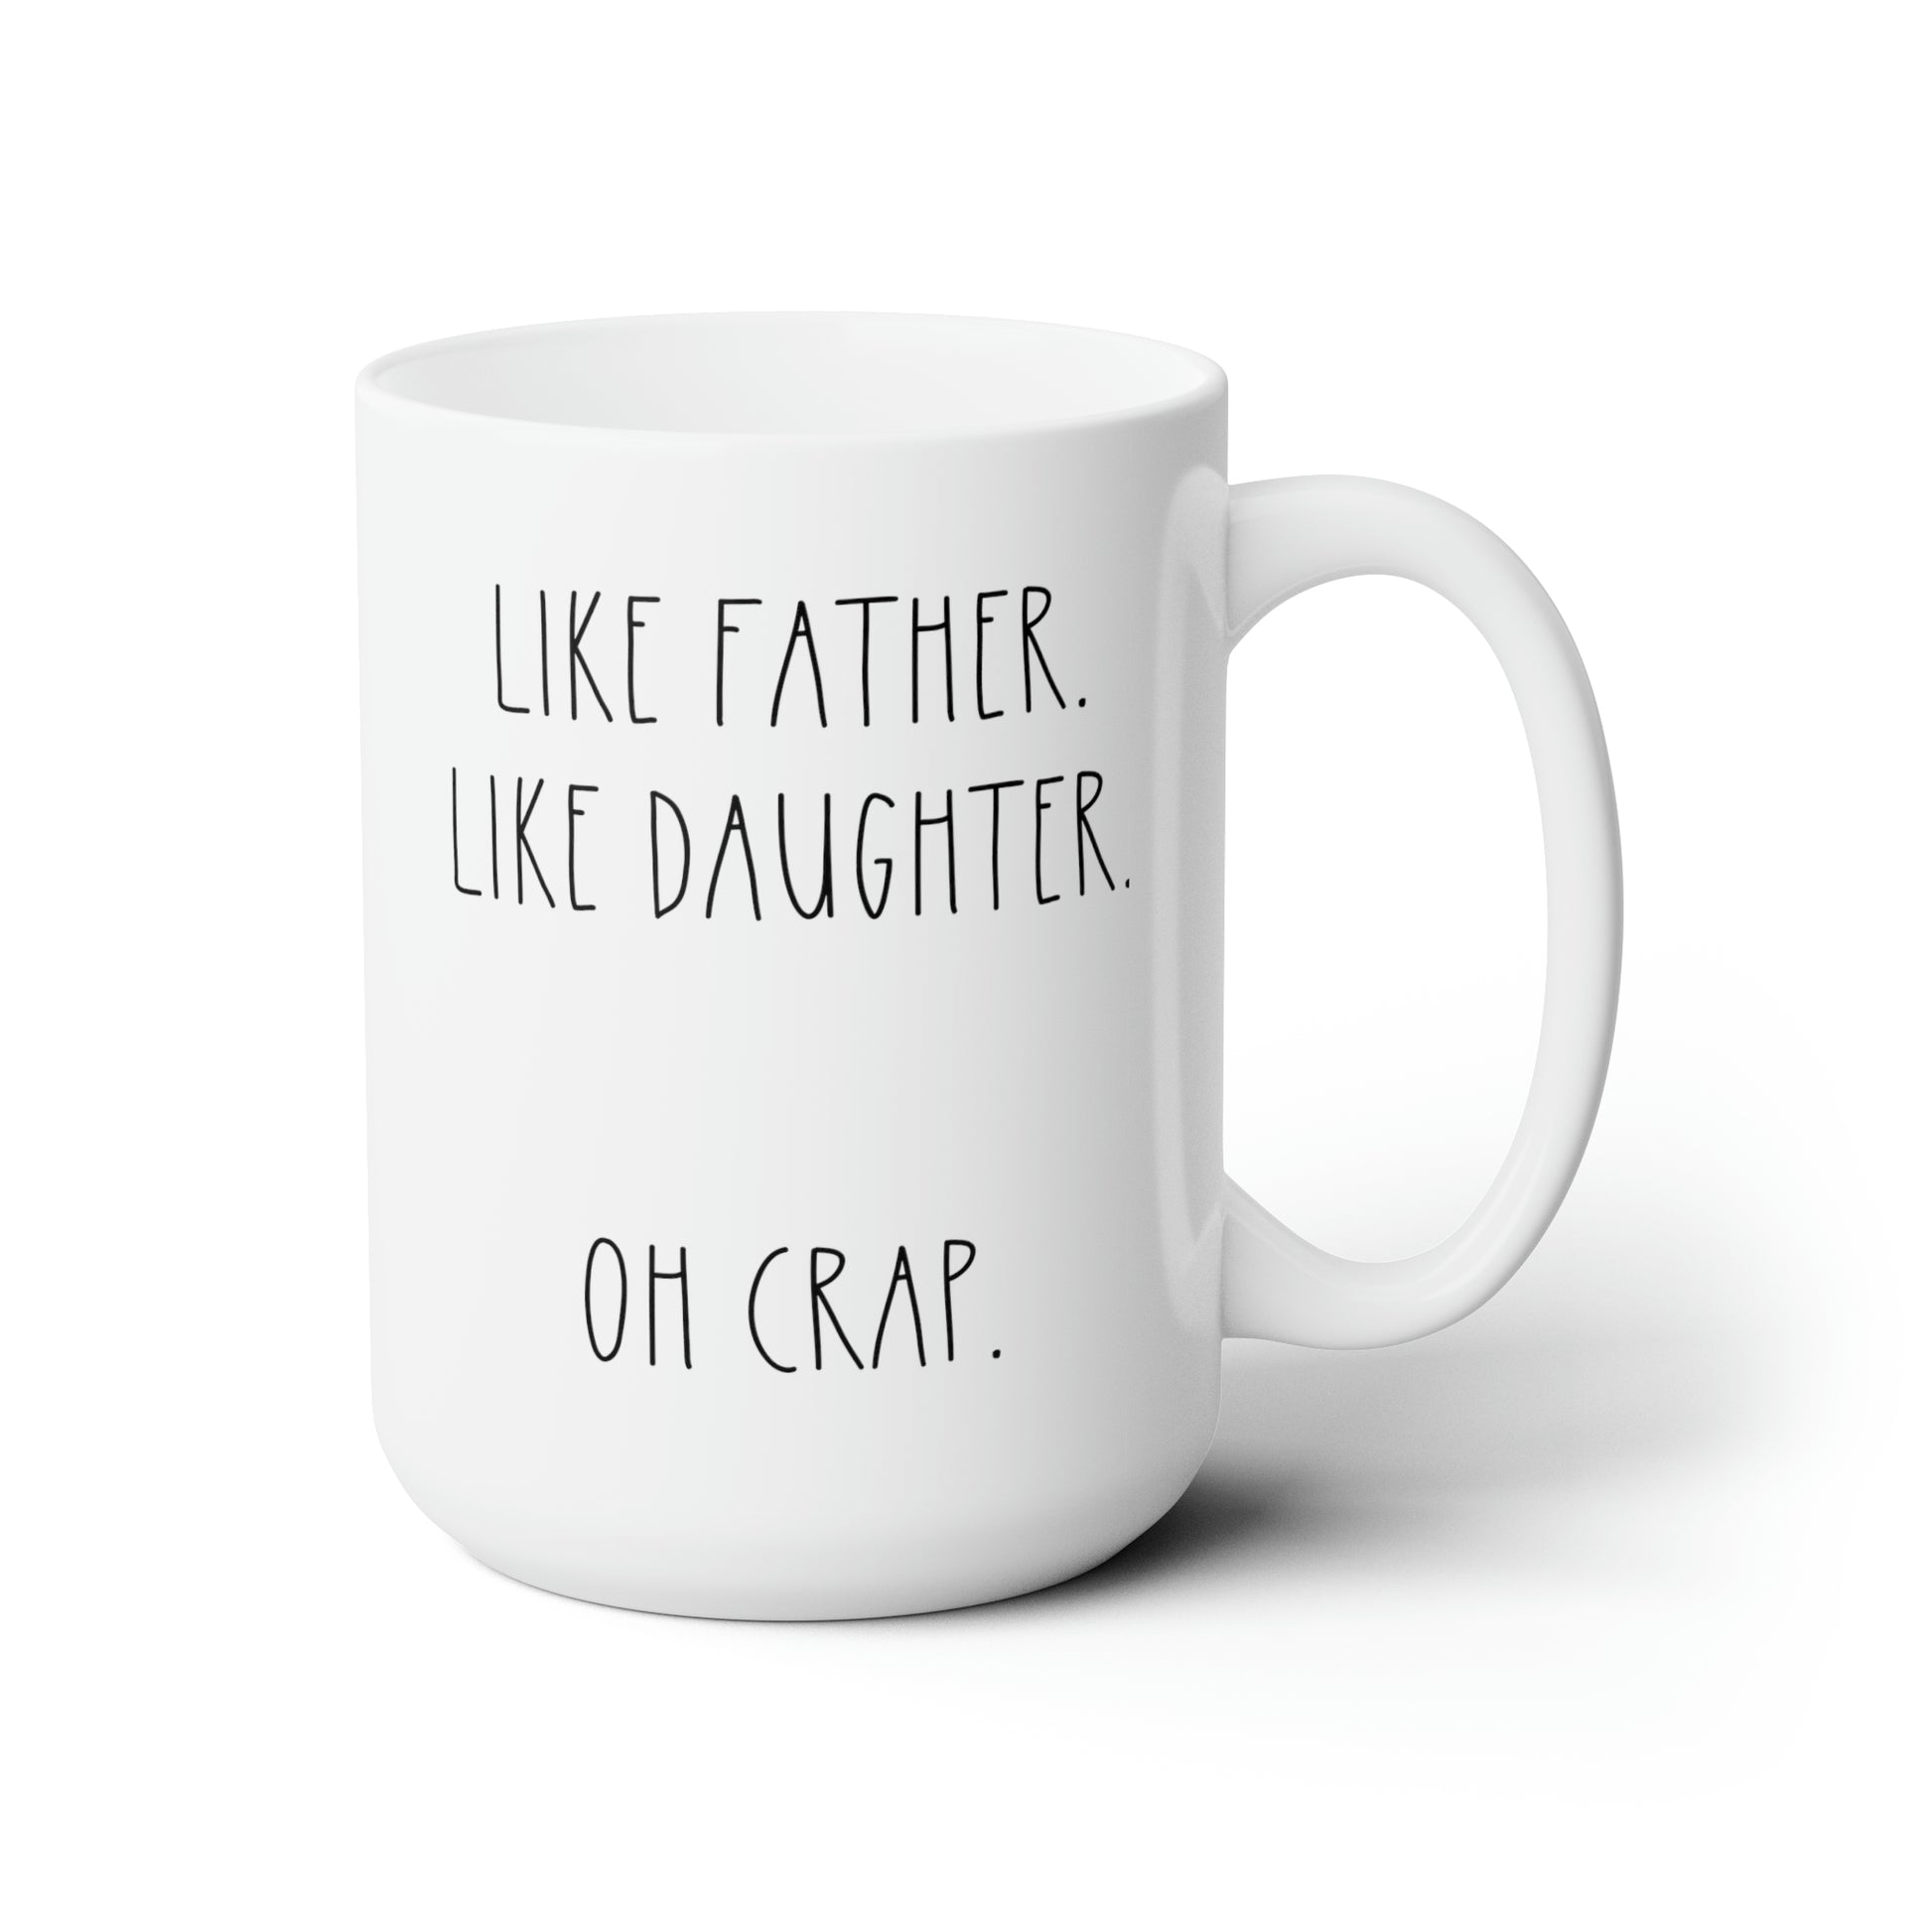 Like Father Like Daughter Oh Crap 15oz white funny large coffee mug gift for dad fathers day christmas birthday waveywares wavey wares wavywares wavy wares